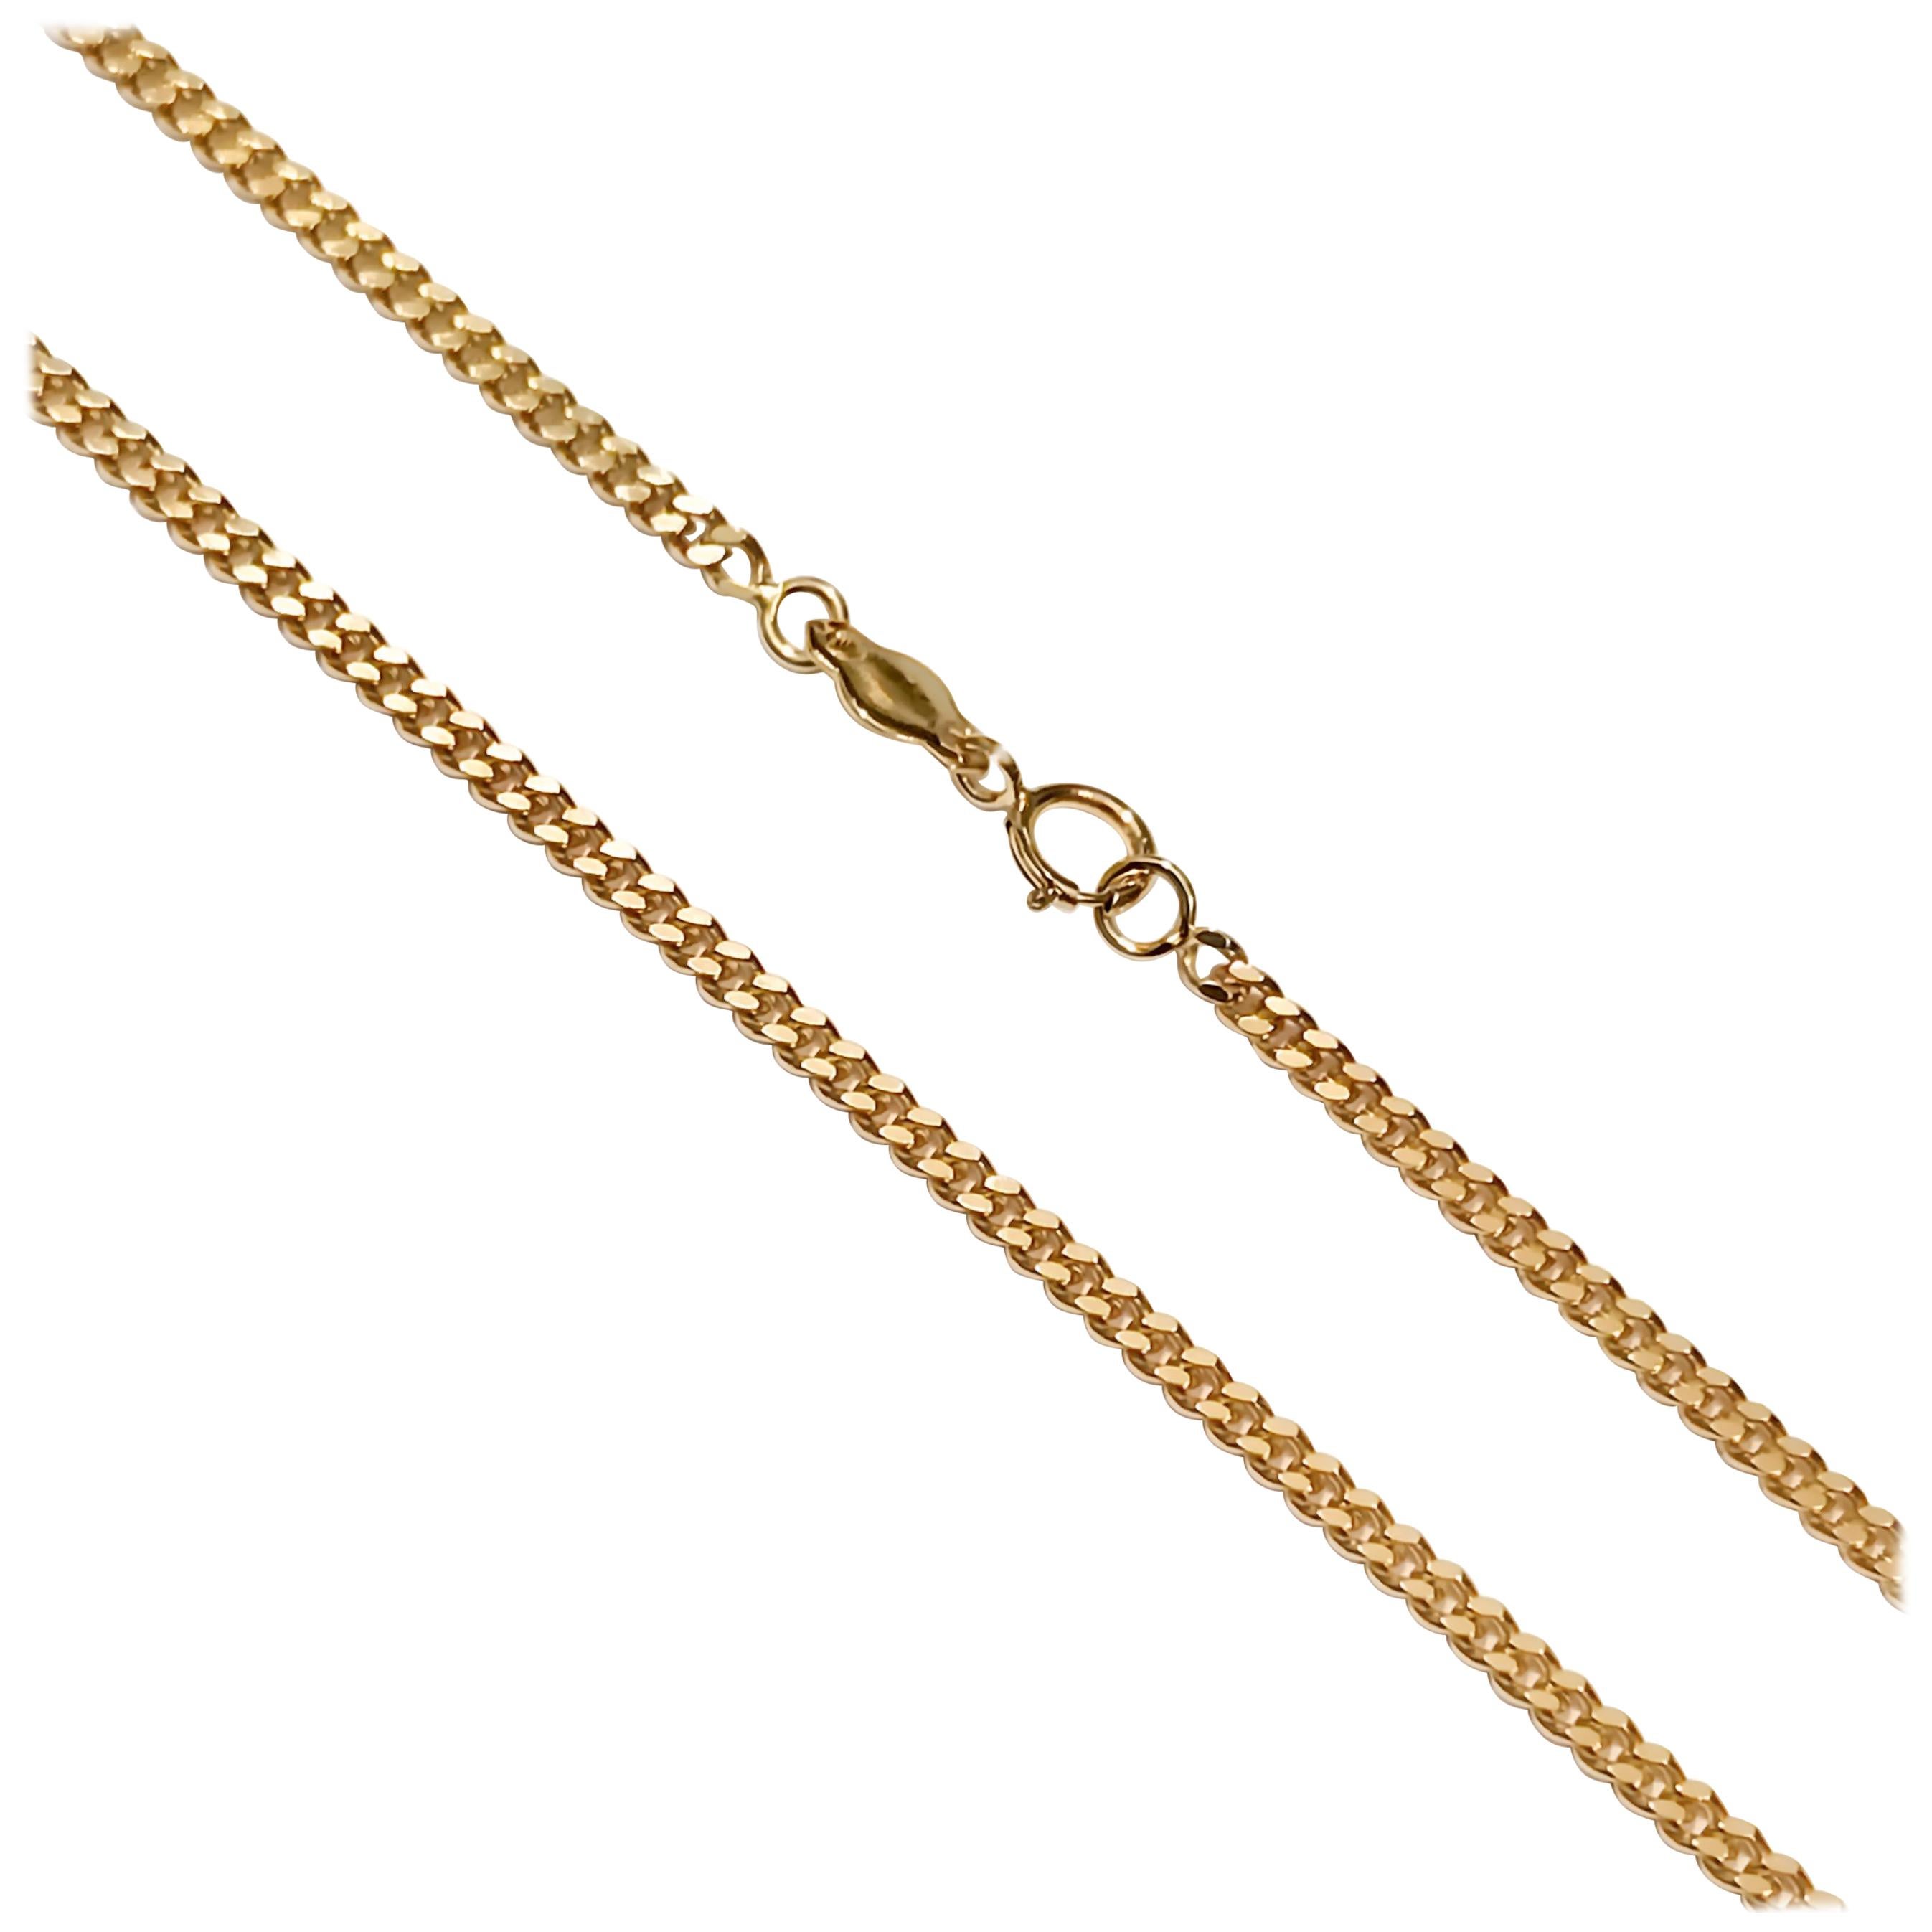 Solid 18 Karat yellow gold flat curb chain.
Hallmark: London’s  Goldsmiths’ Company –  Assay Office
Length:44.00cm
Gauge: 2.00mm
Weight: 7.05g
All our jewellery are new and have never been previously owned or worn. 
We are a member of the UK